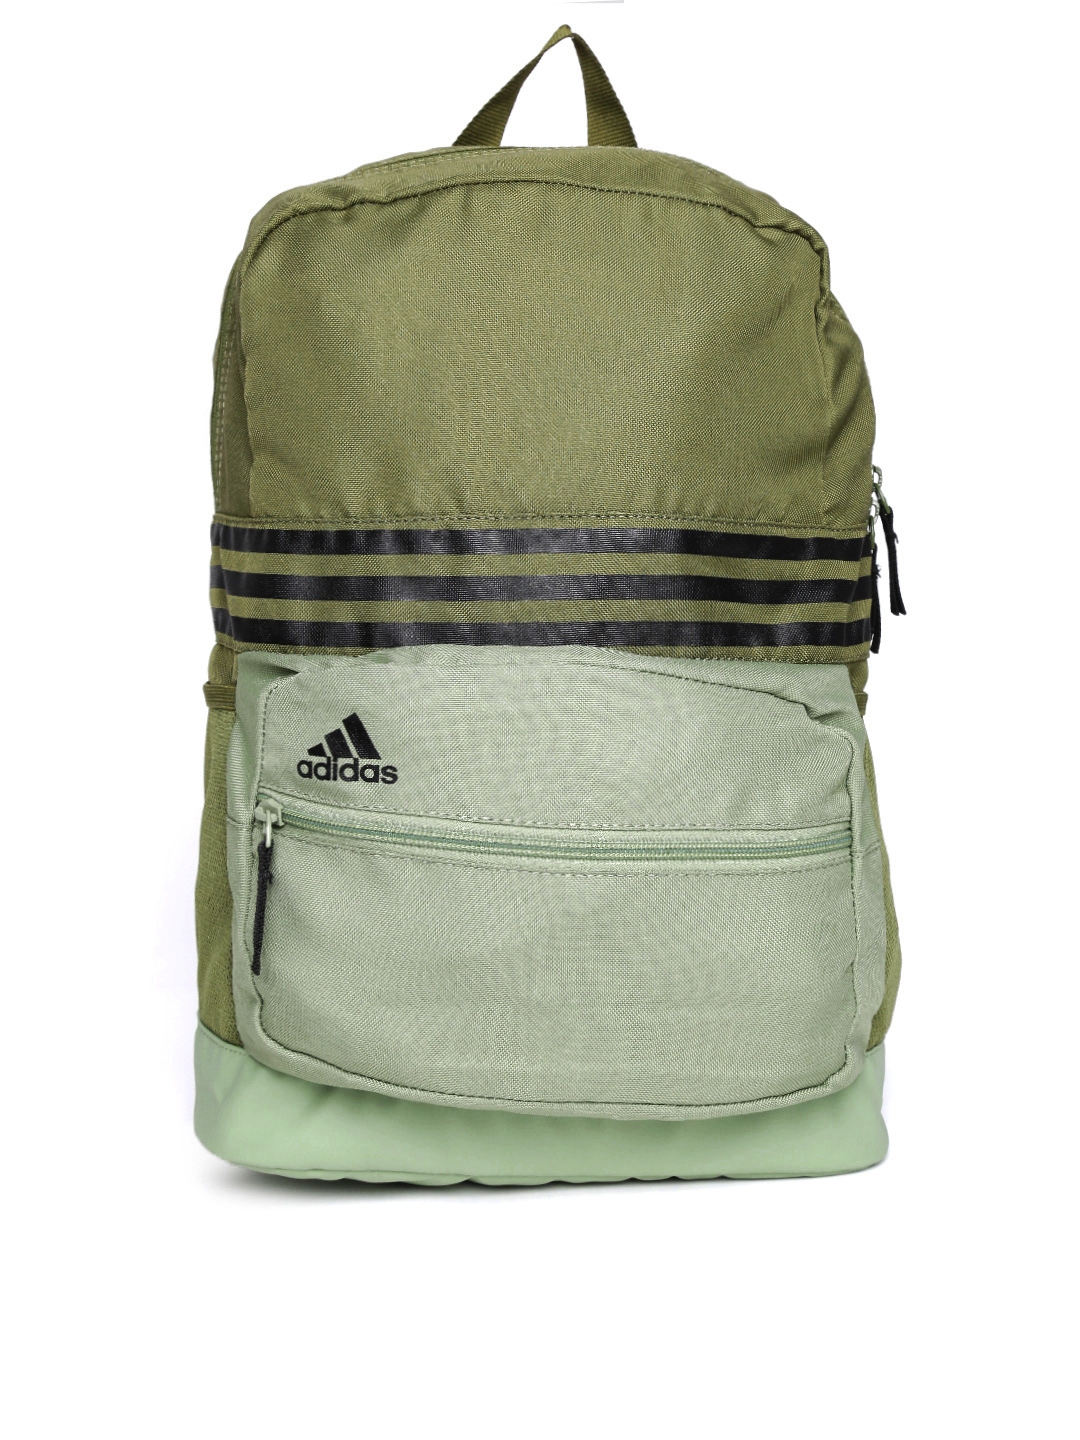 Buy ADIDAS Unisex Olive Green ASBP M 3S Striped Backpack - Backpacks Unisex 1504625 | Myntra